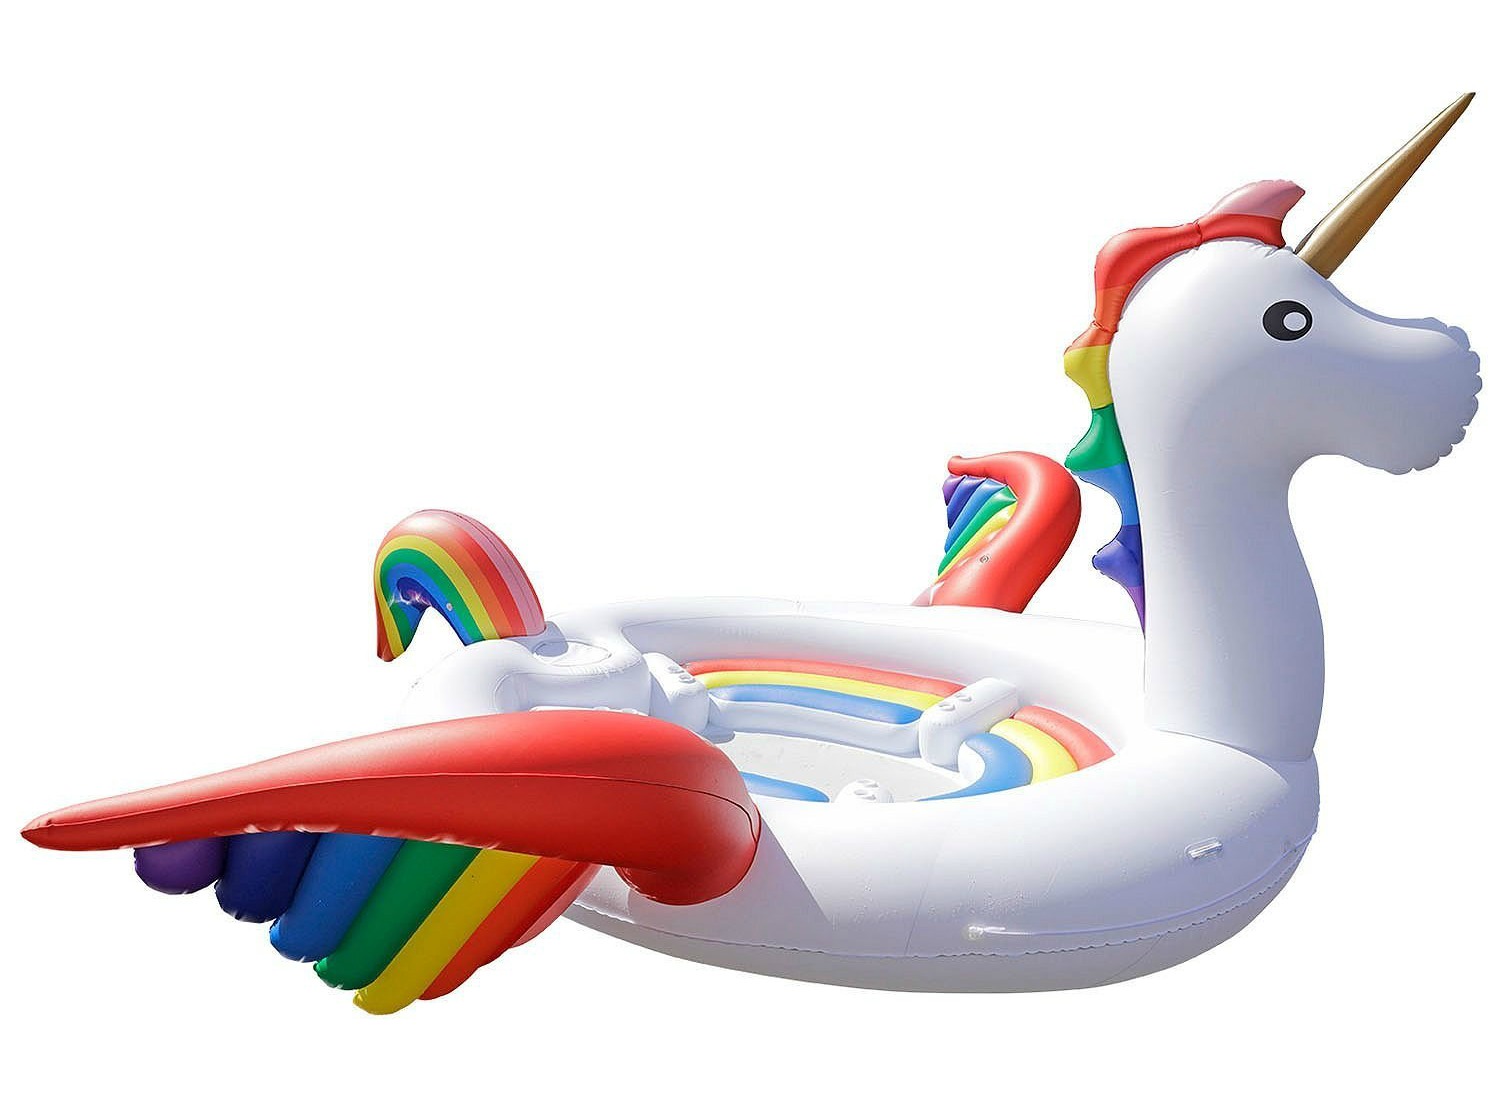 These are the Pool Floats That Will Make Your Summer Extra Fun This Year!